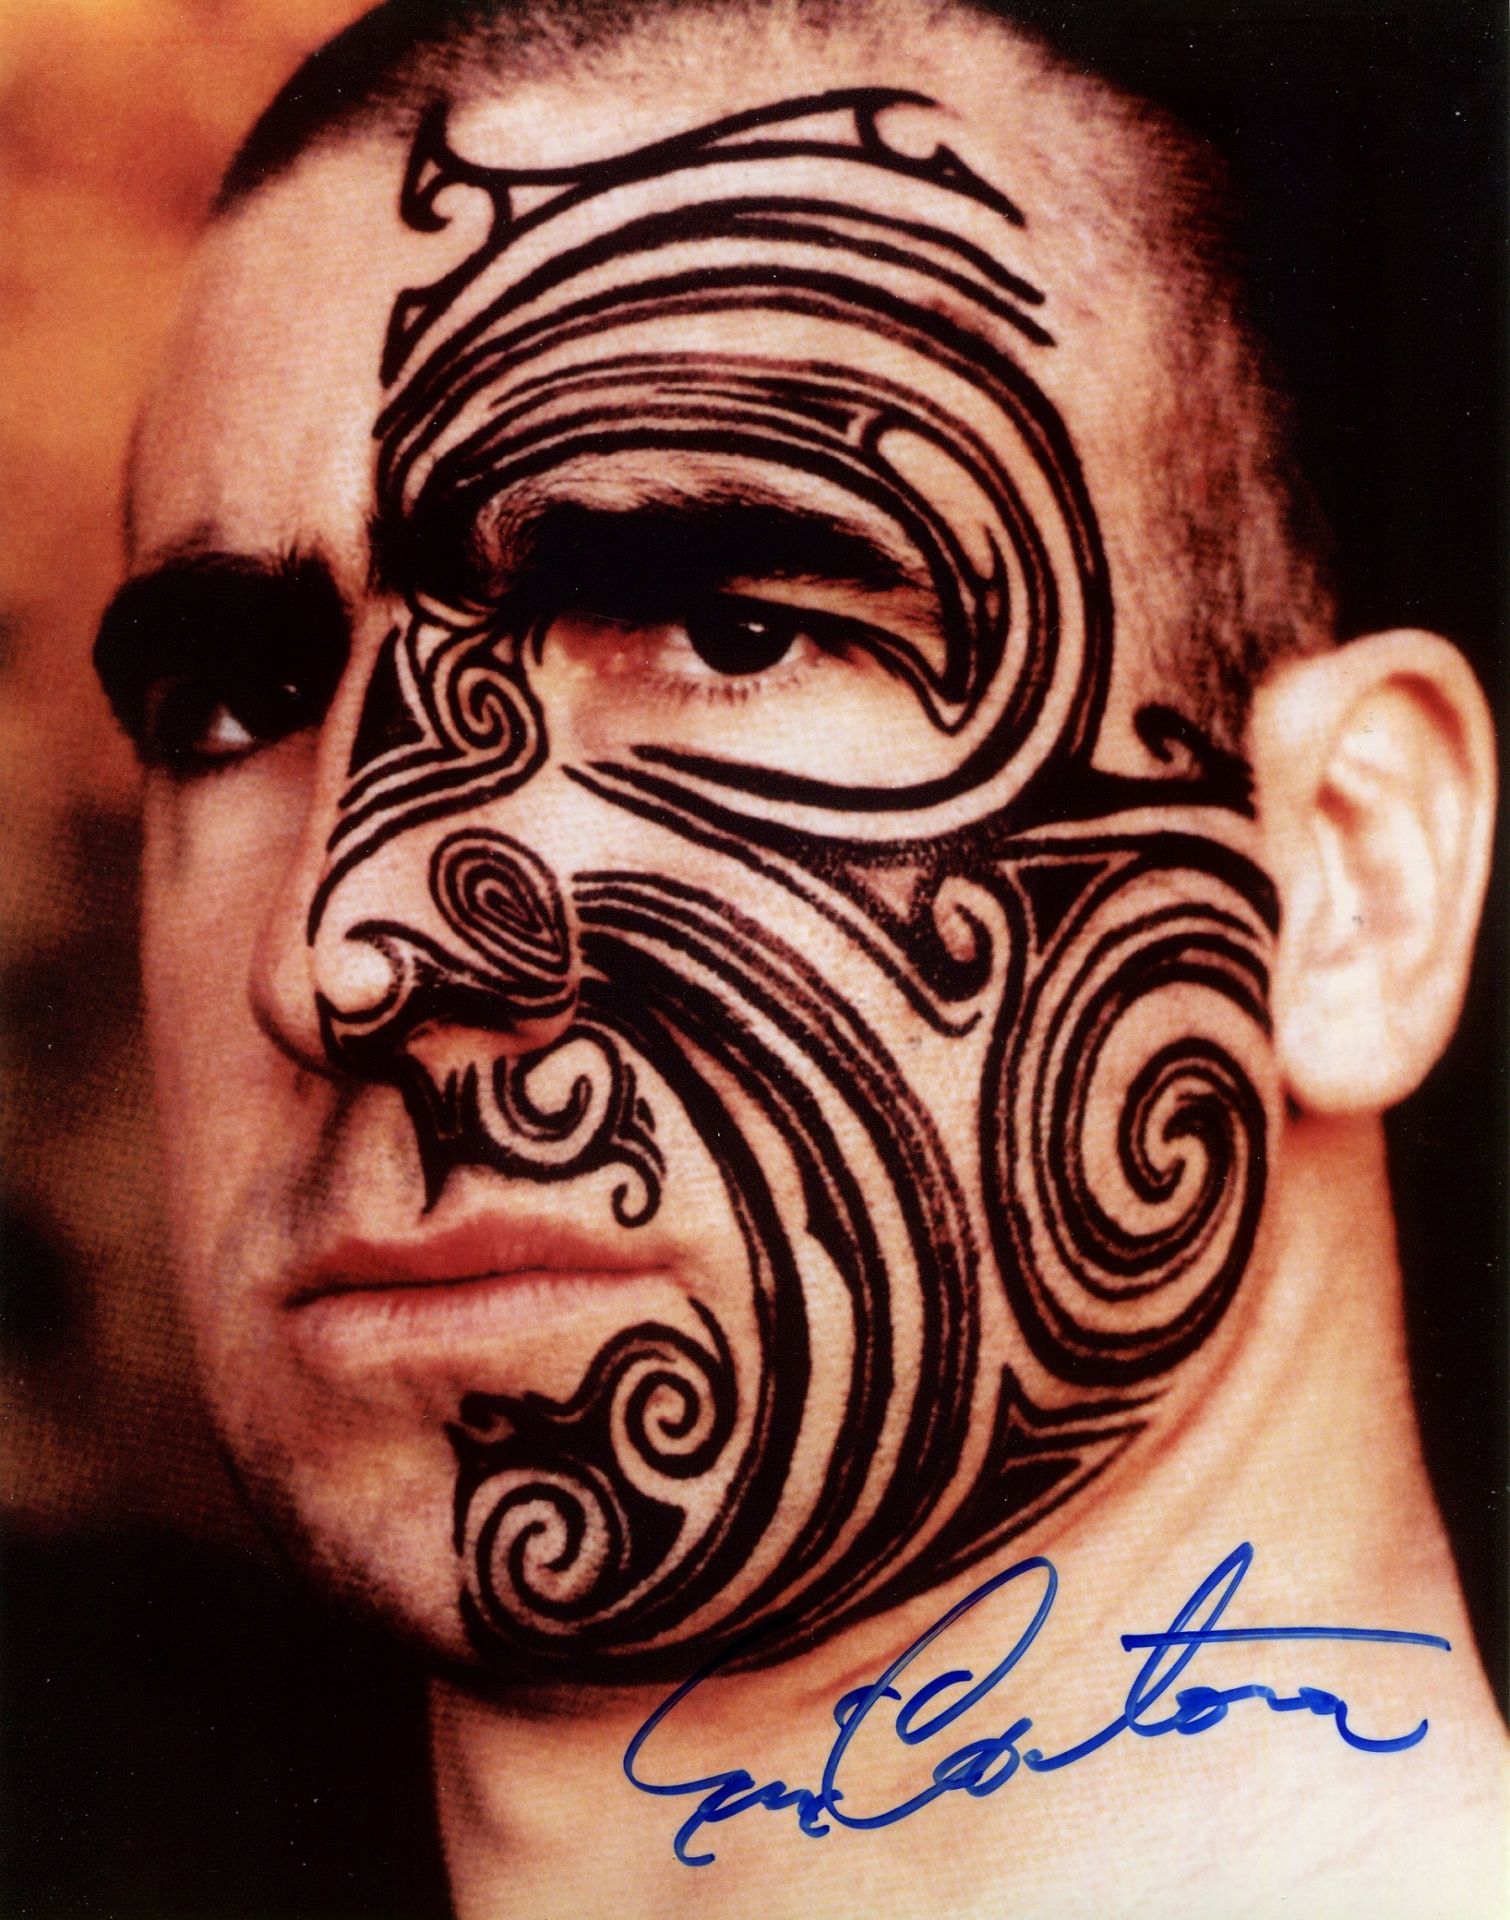 CANTONA ERIC: (1966- ) French Footballer. Signed colour 8 x 10 photograph by Cantona, the image